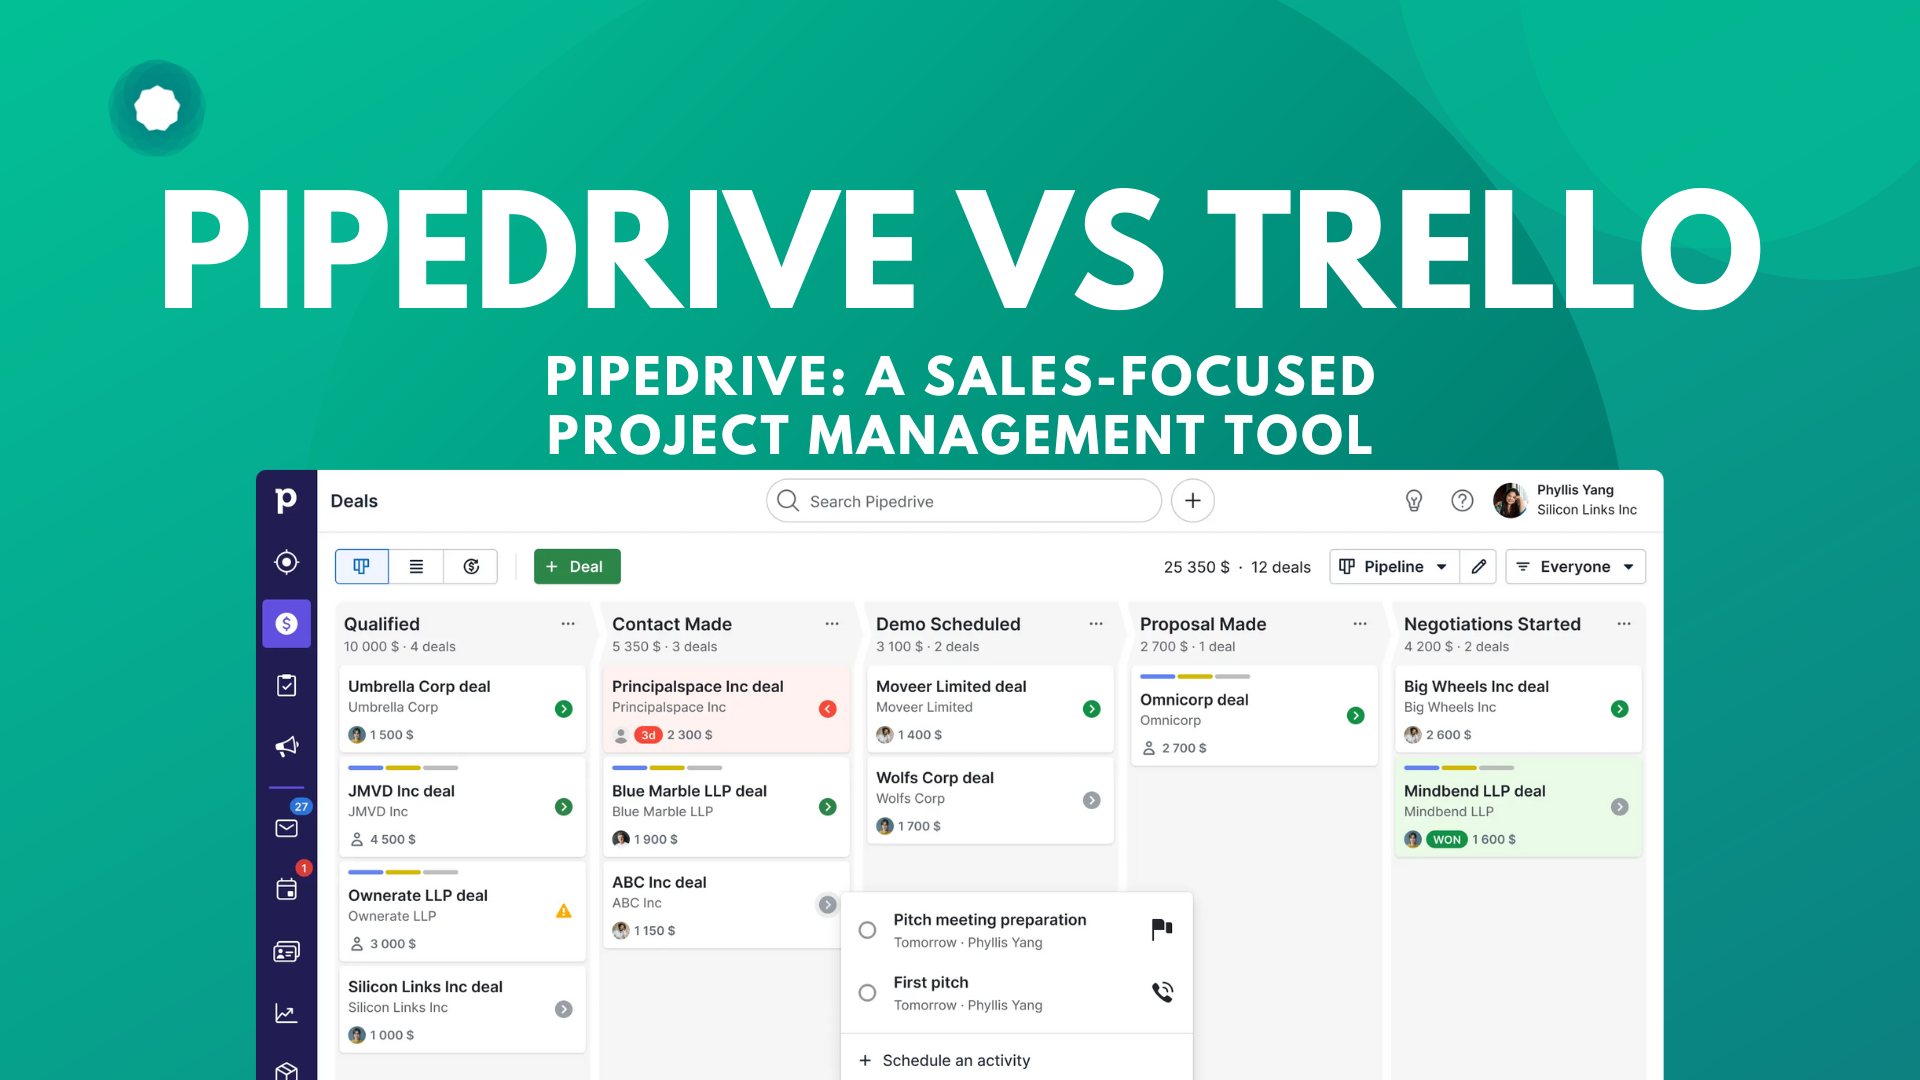 Pipedrive: A Sales-Focused Project Management Tool